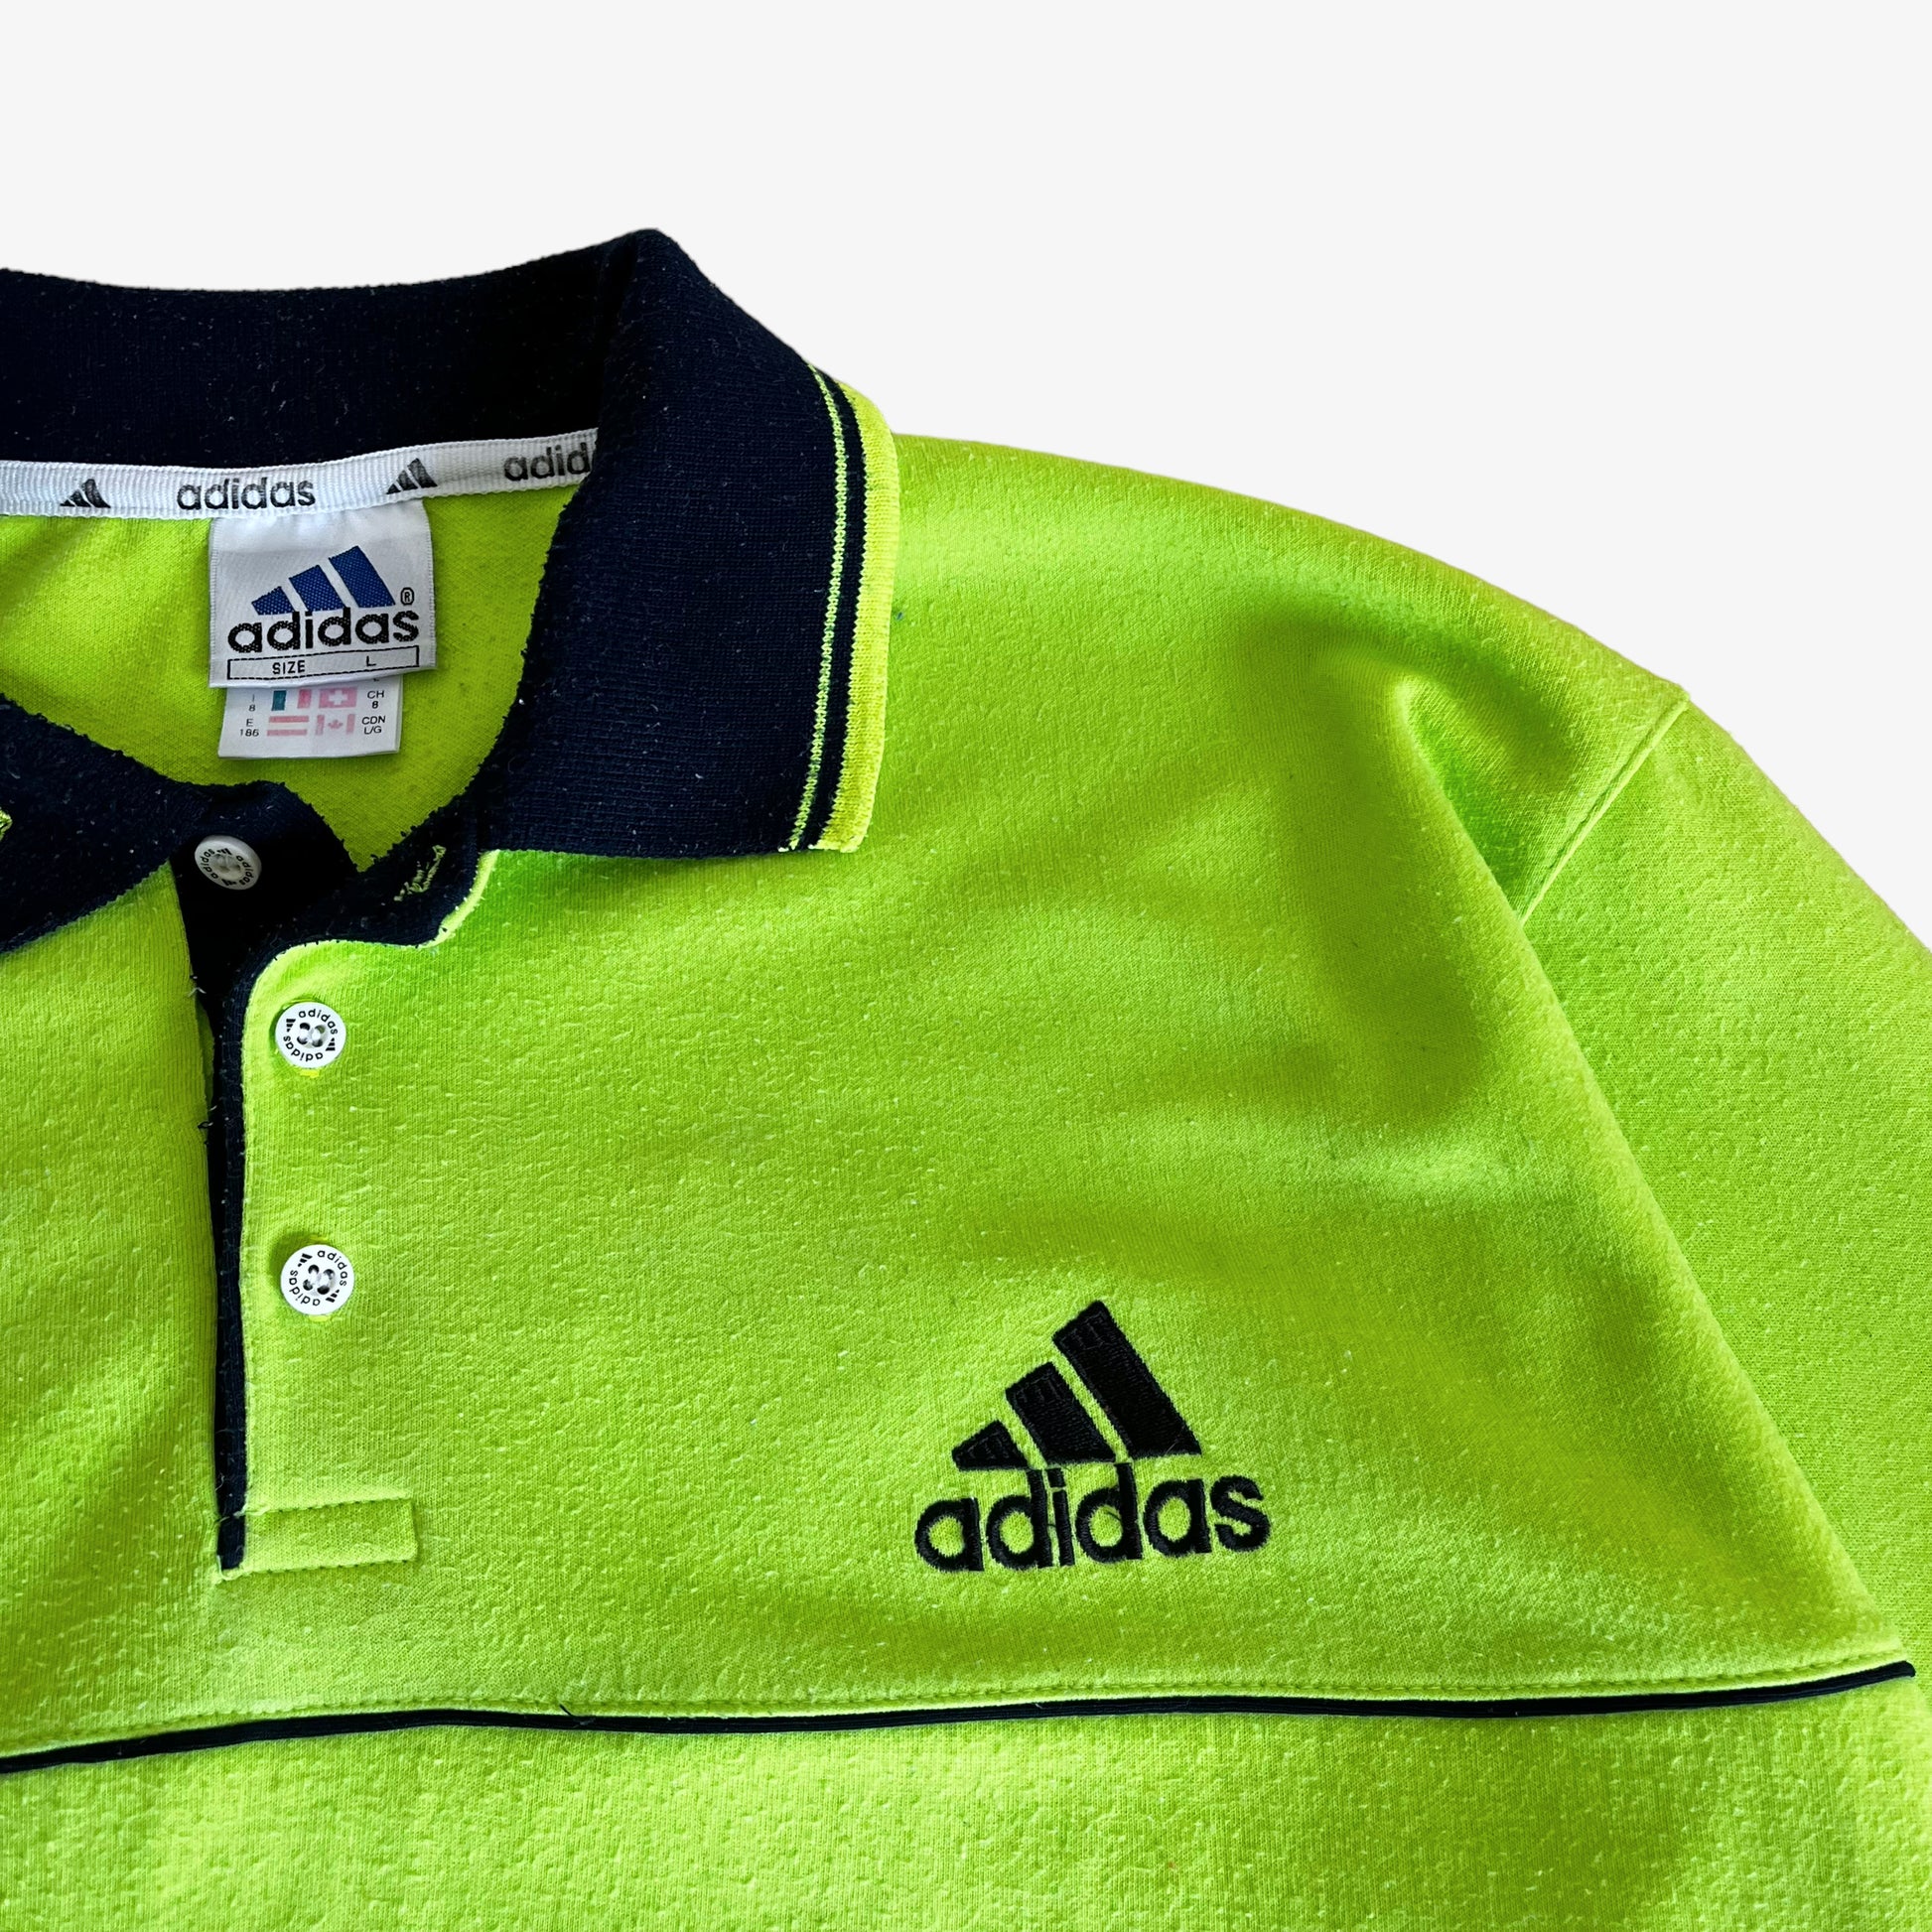 Vintage 90s Adidas Lime Green Rugby Shirt With Back Spell Out Logo - Casspios Dream